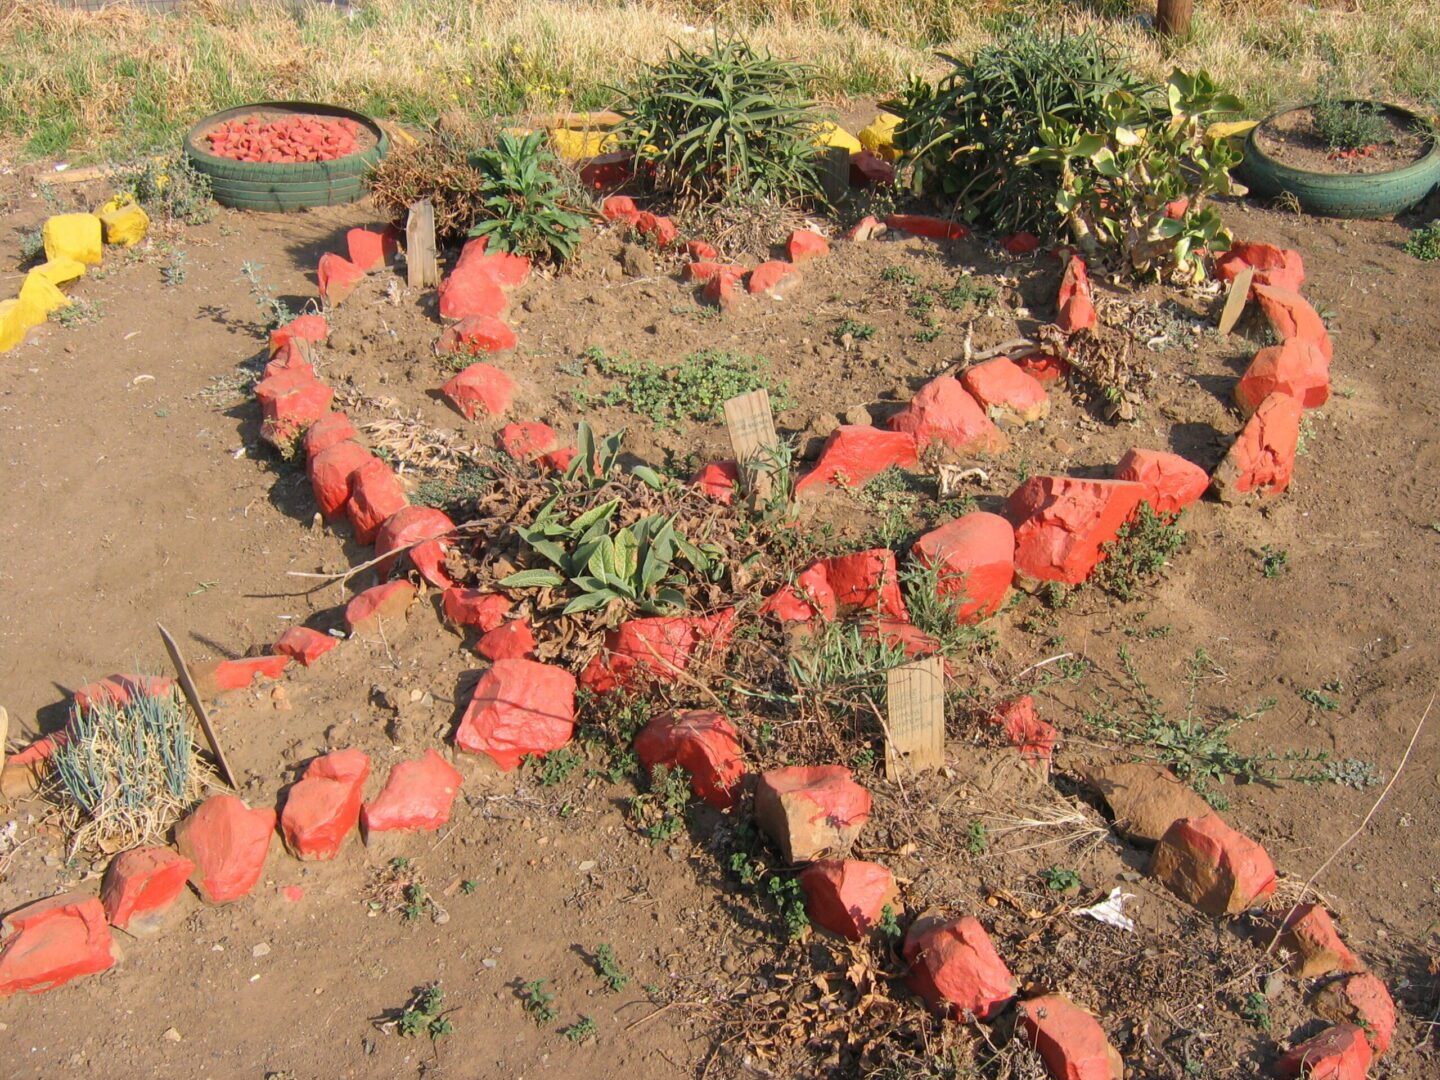 A pile of watermelon sitting in the dirt.